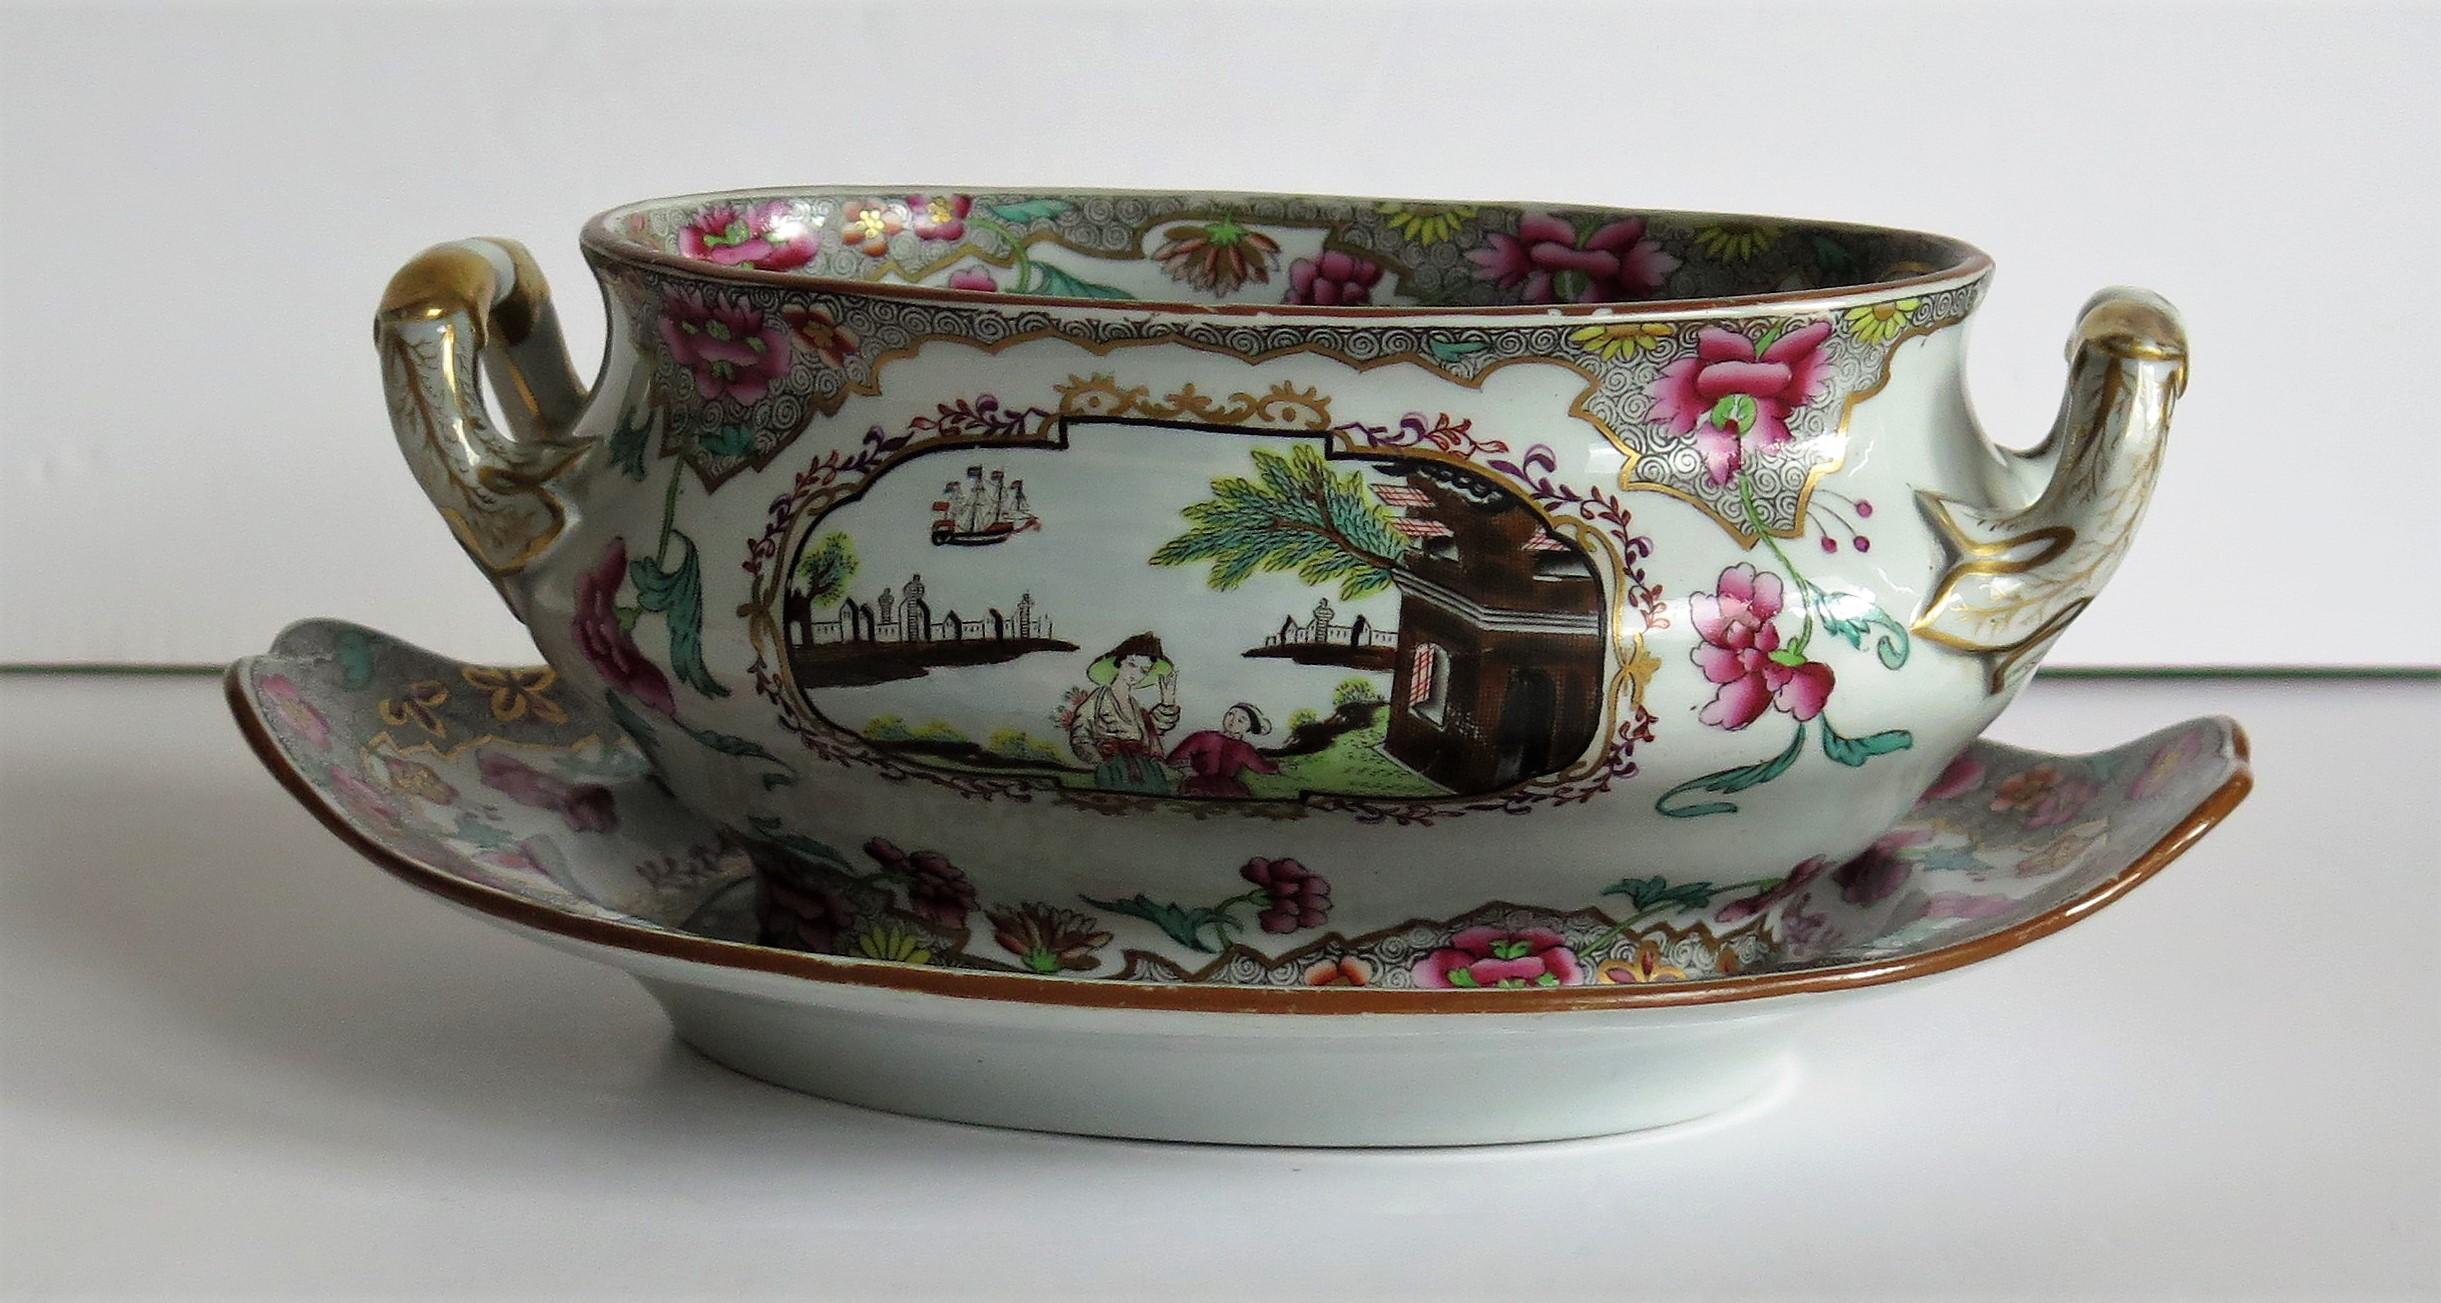 19th Century Spode Stone China Sauce Tureen & Stand in Ship Pattern 3067, circa 1810